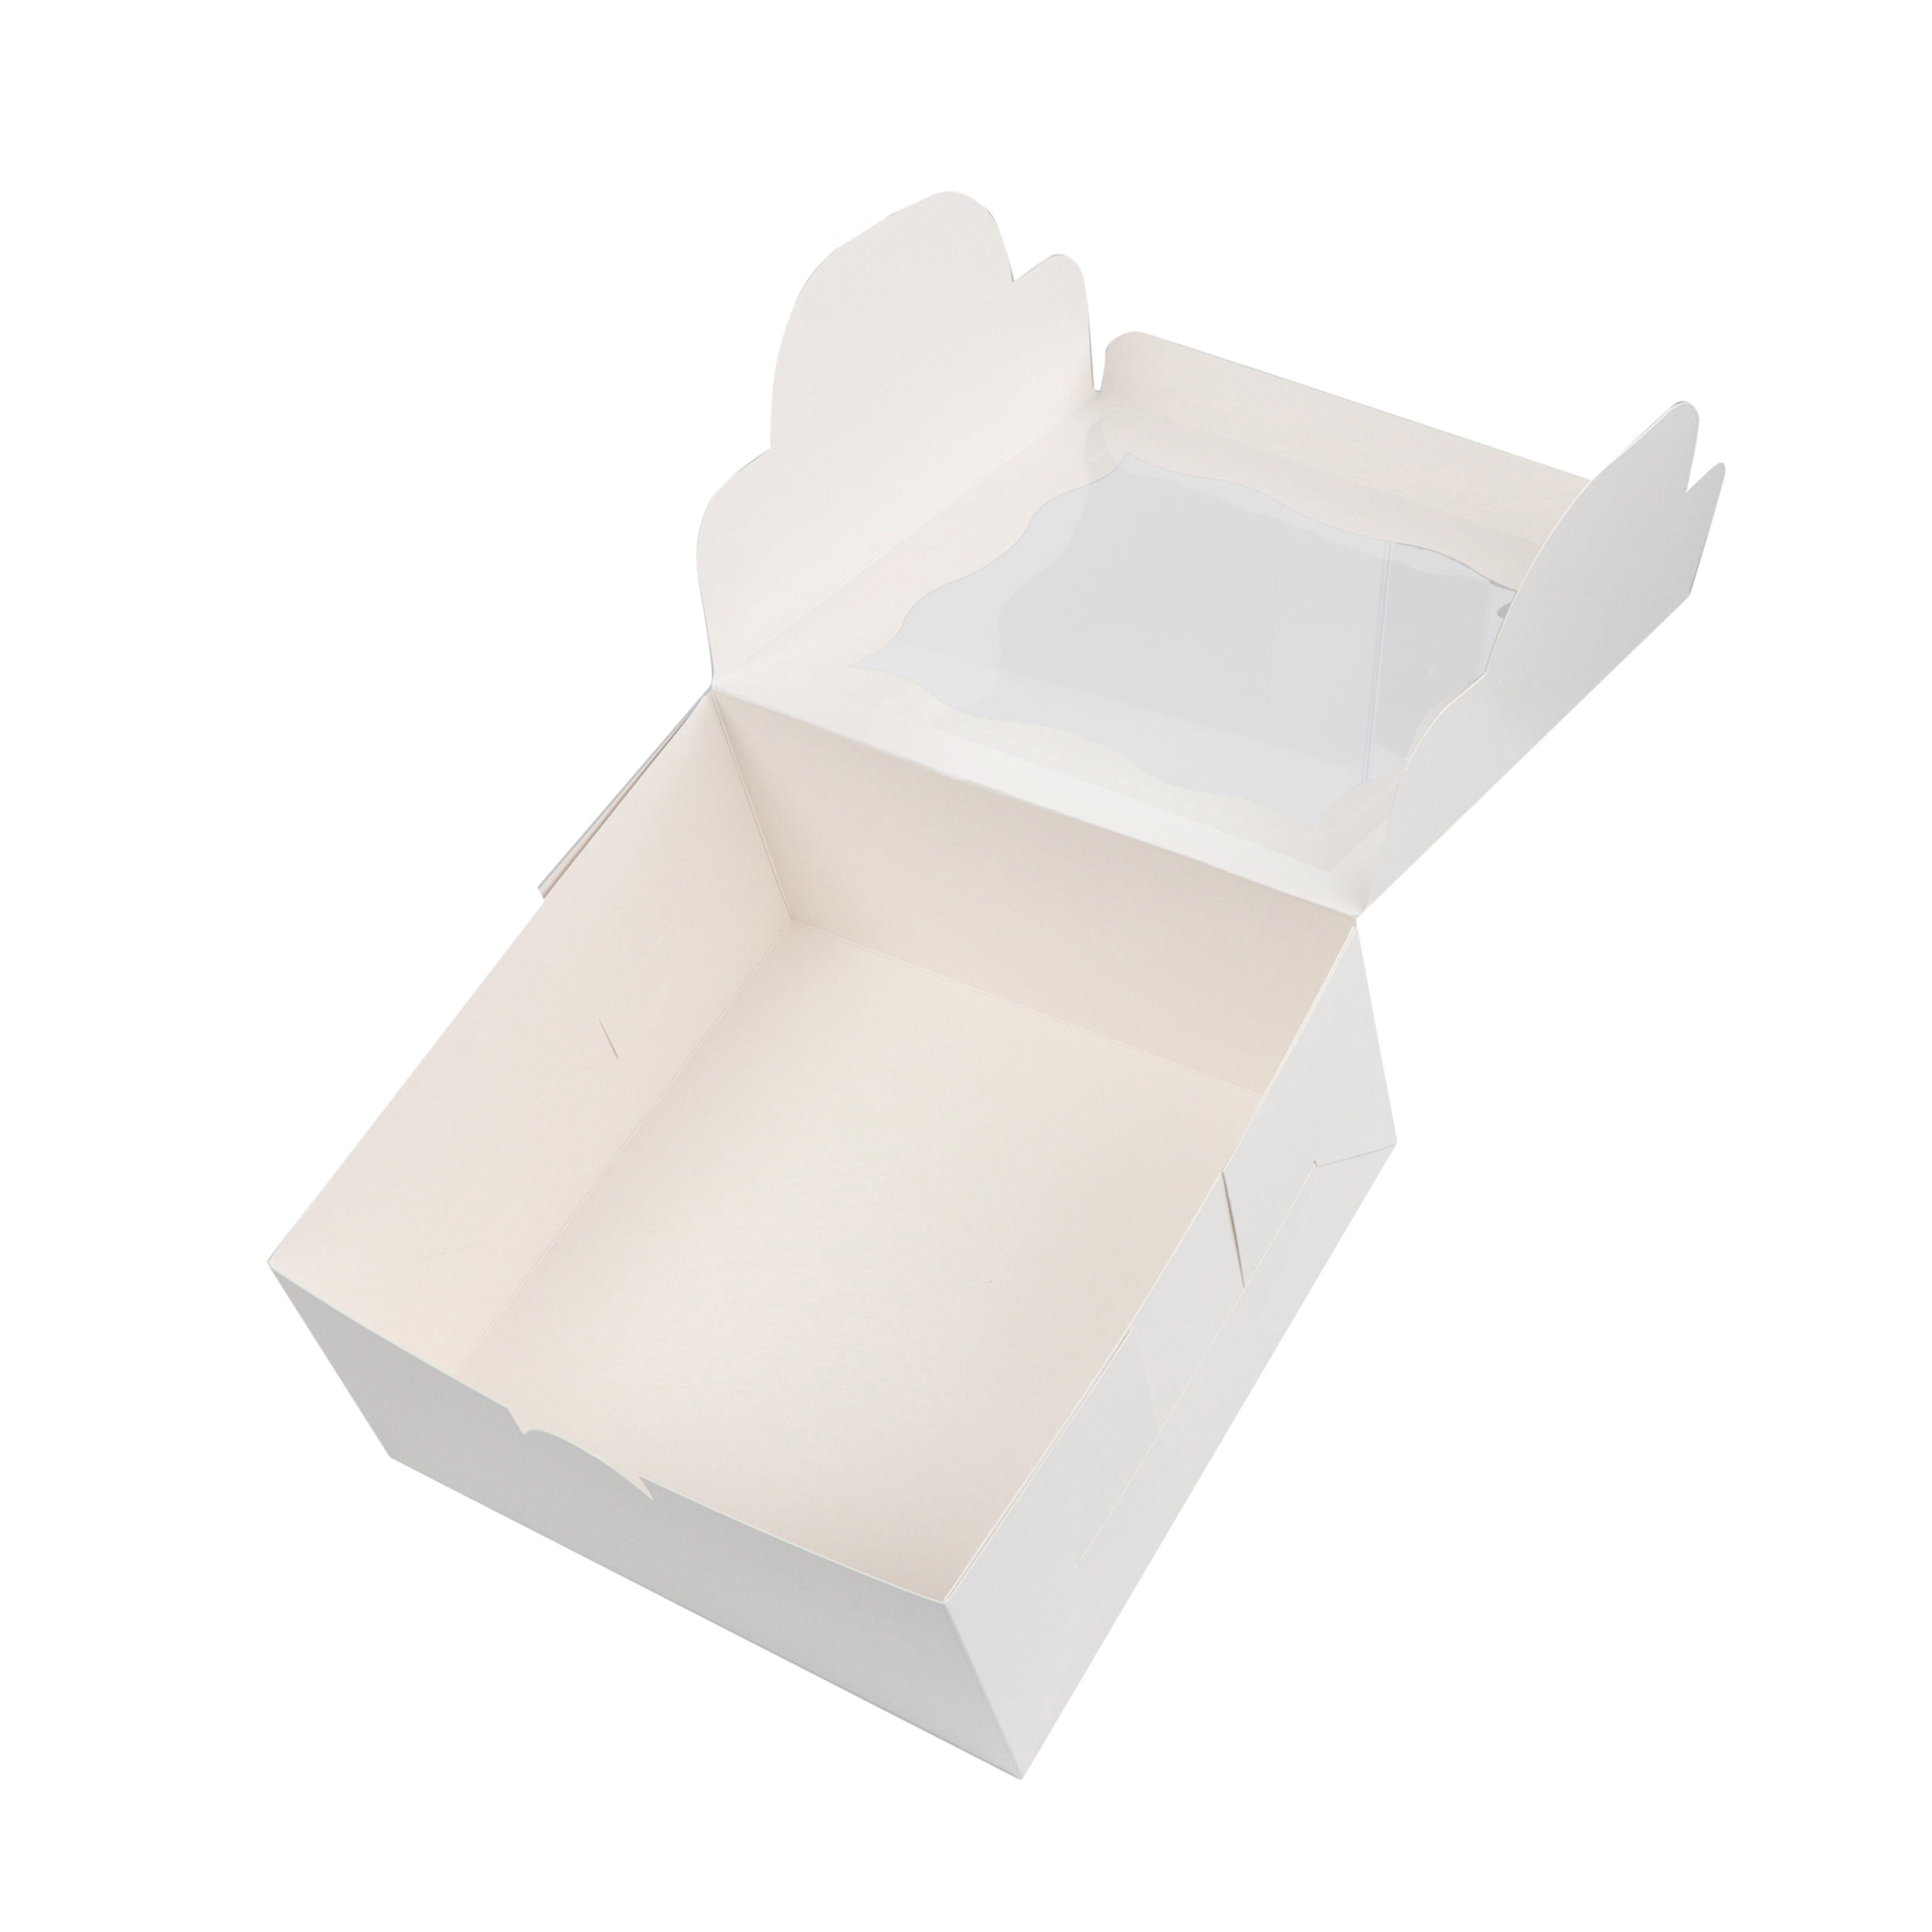 Spec101 Square Cake Boxes with Window 10pk White Cake Boxes 10x10x5 Inch 